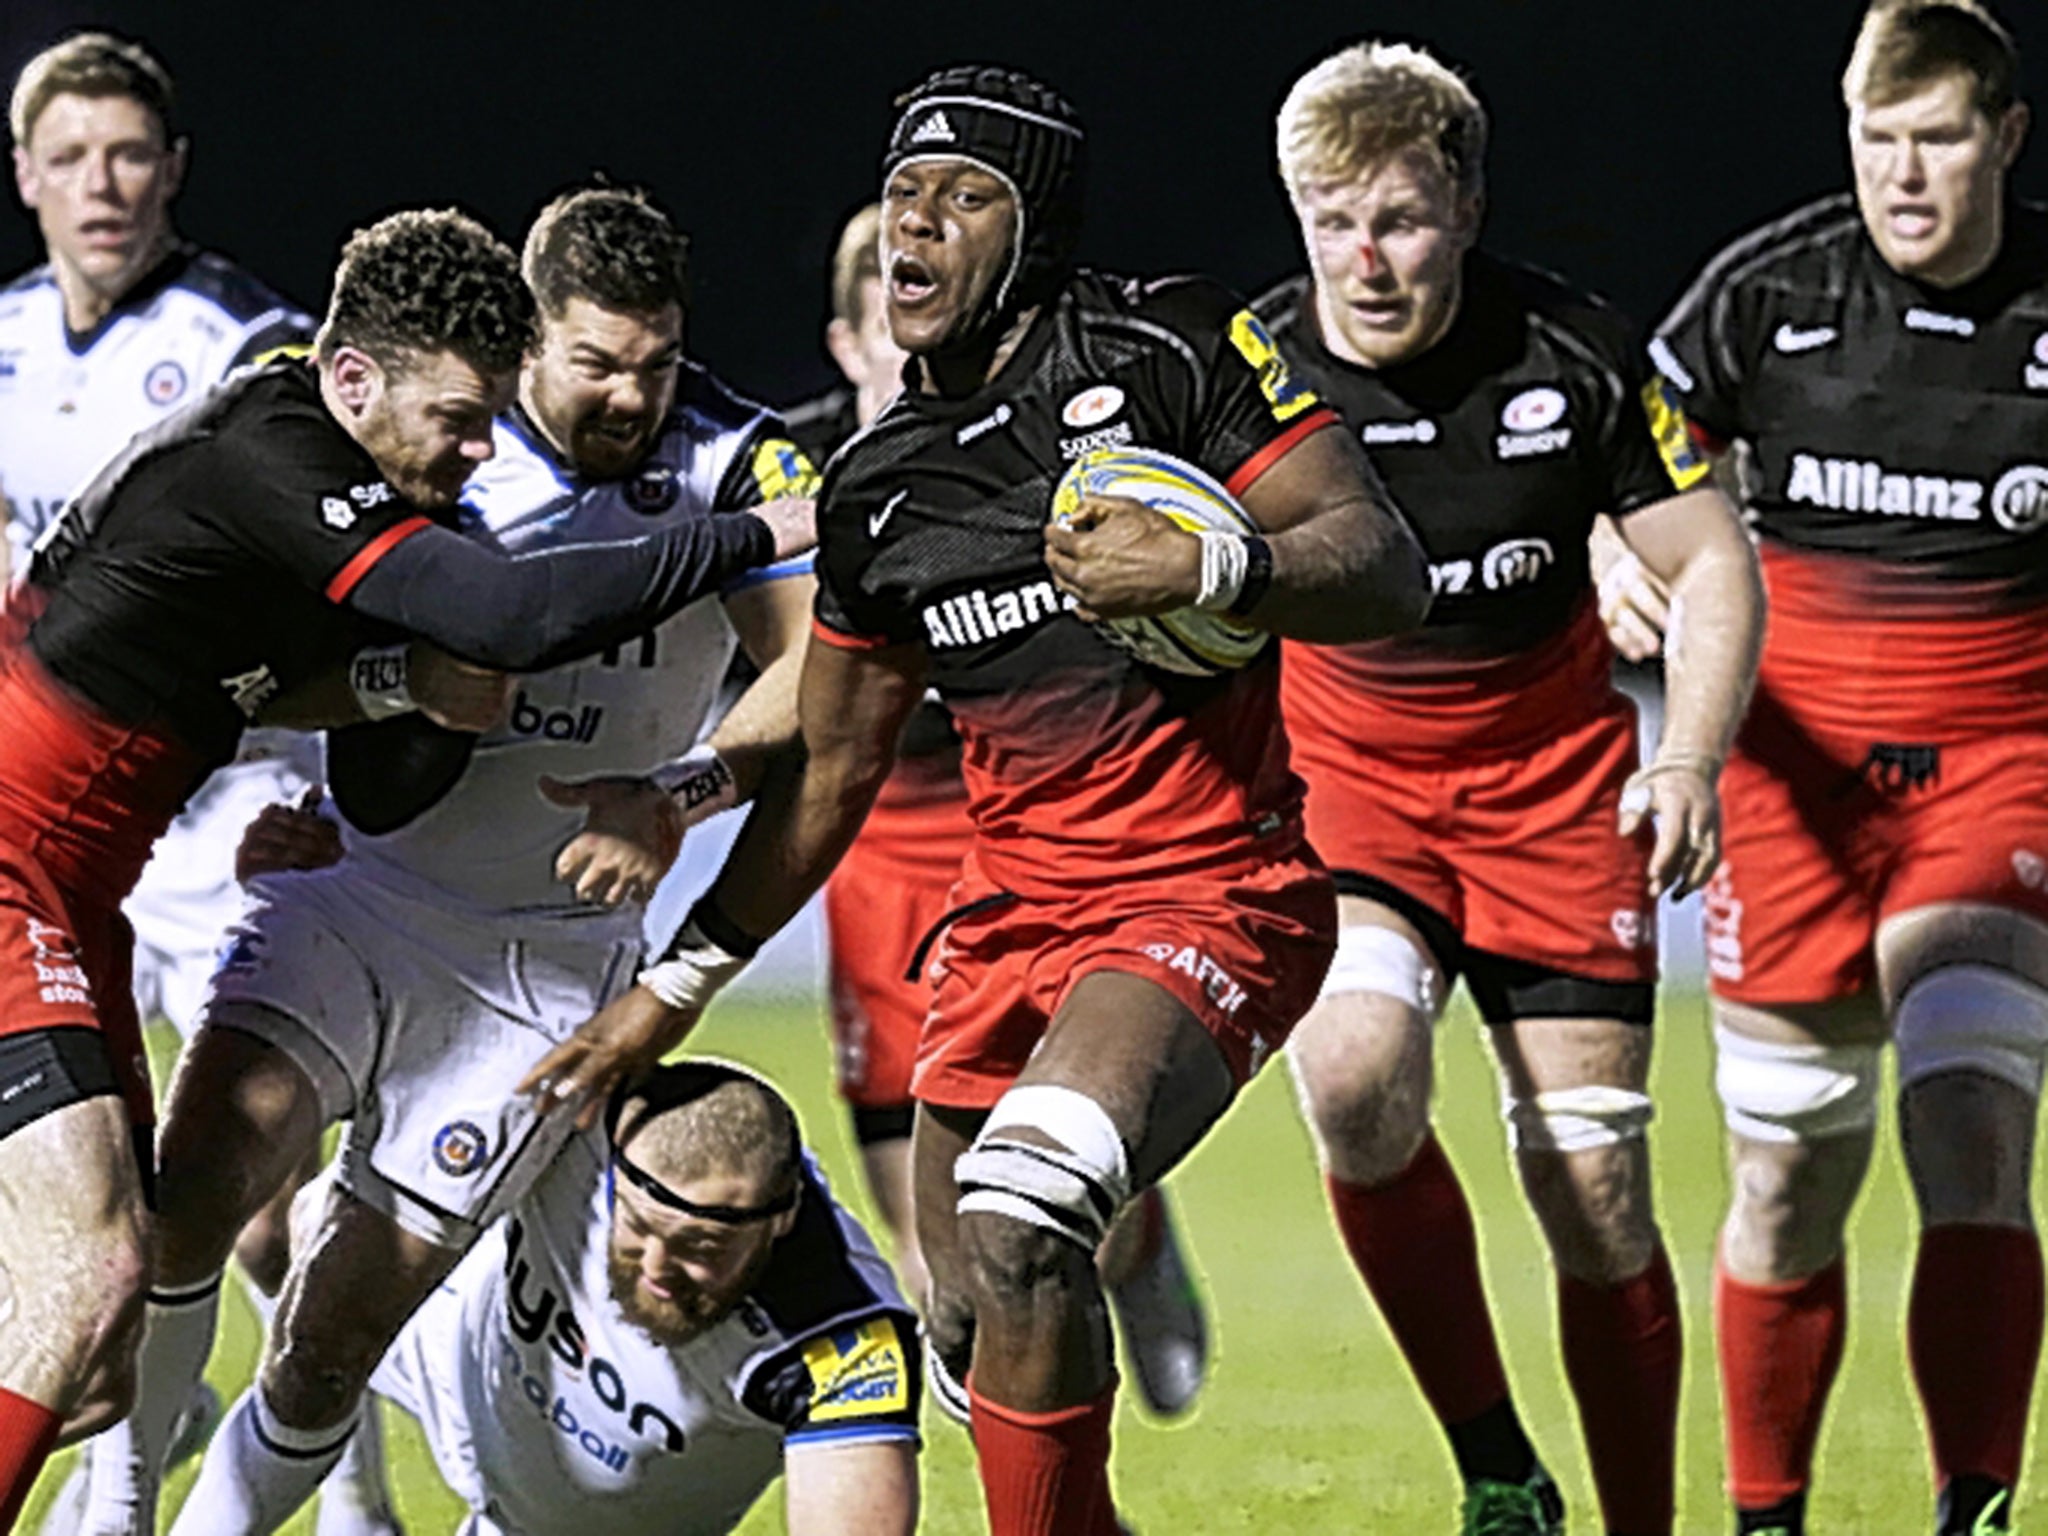 Maro Itoje busts Bath’s line during Sarries’ win